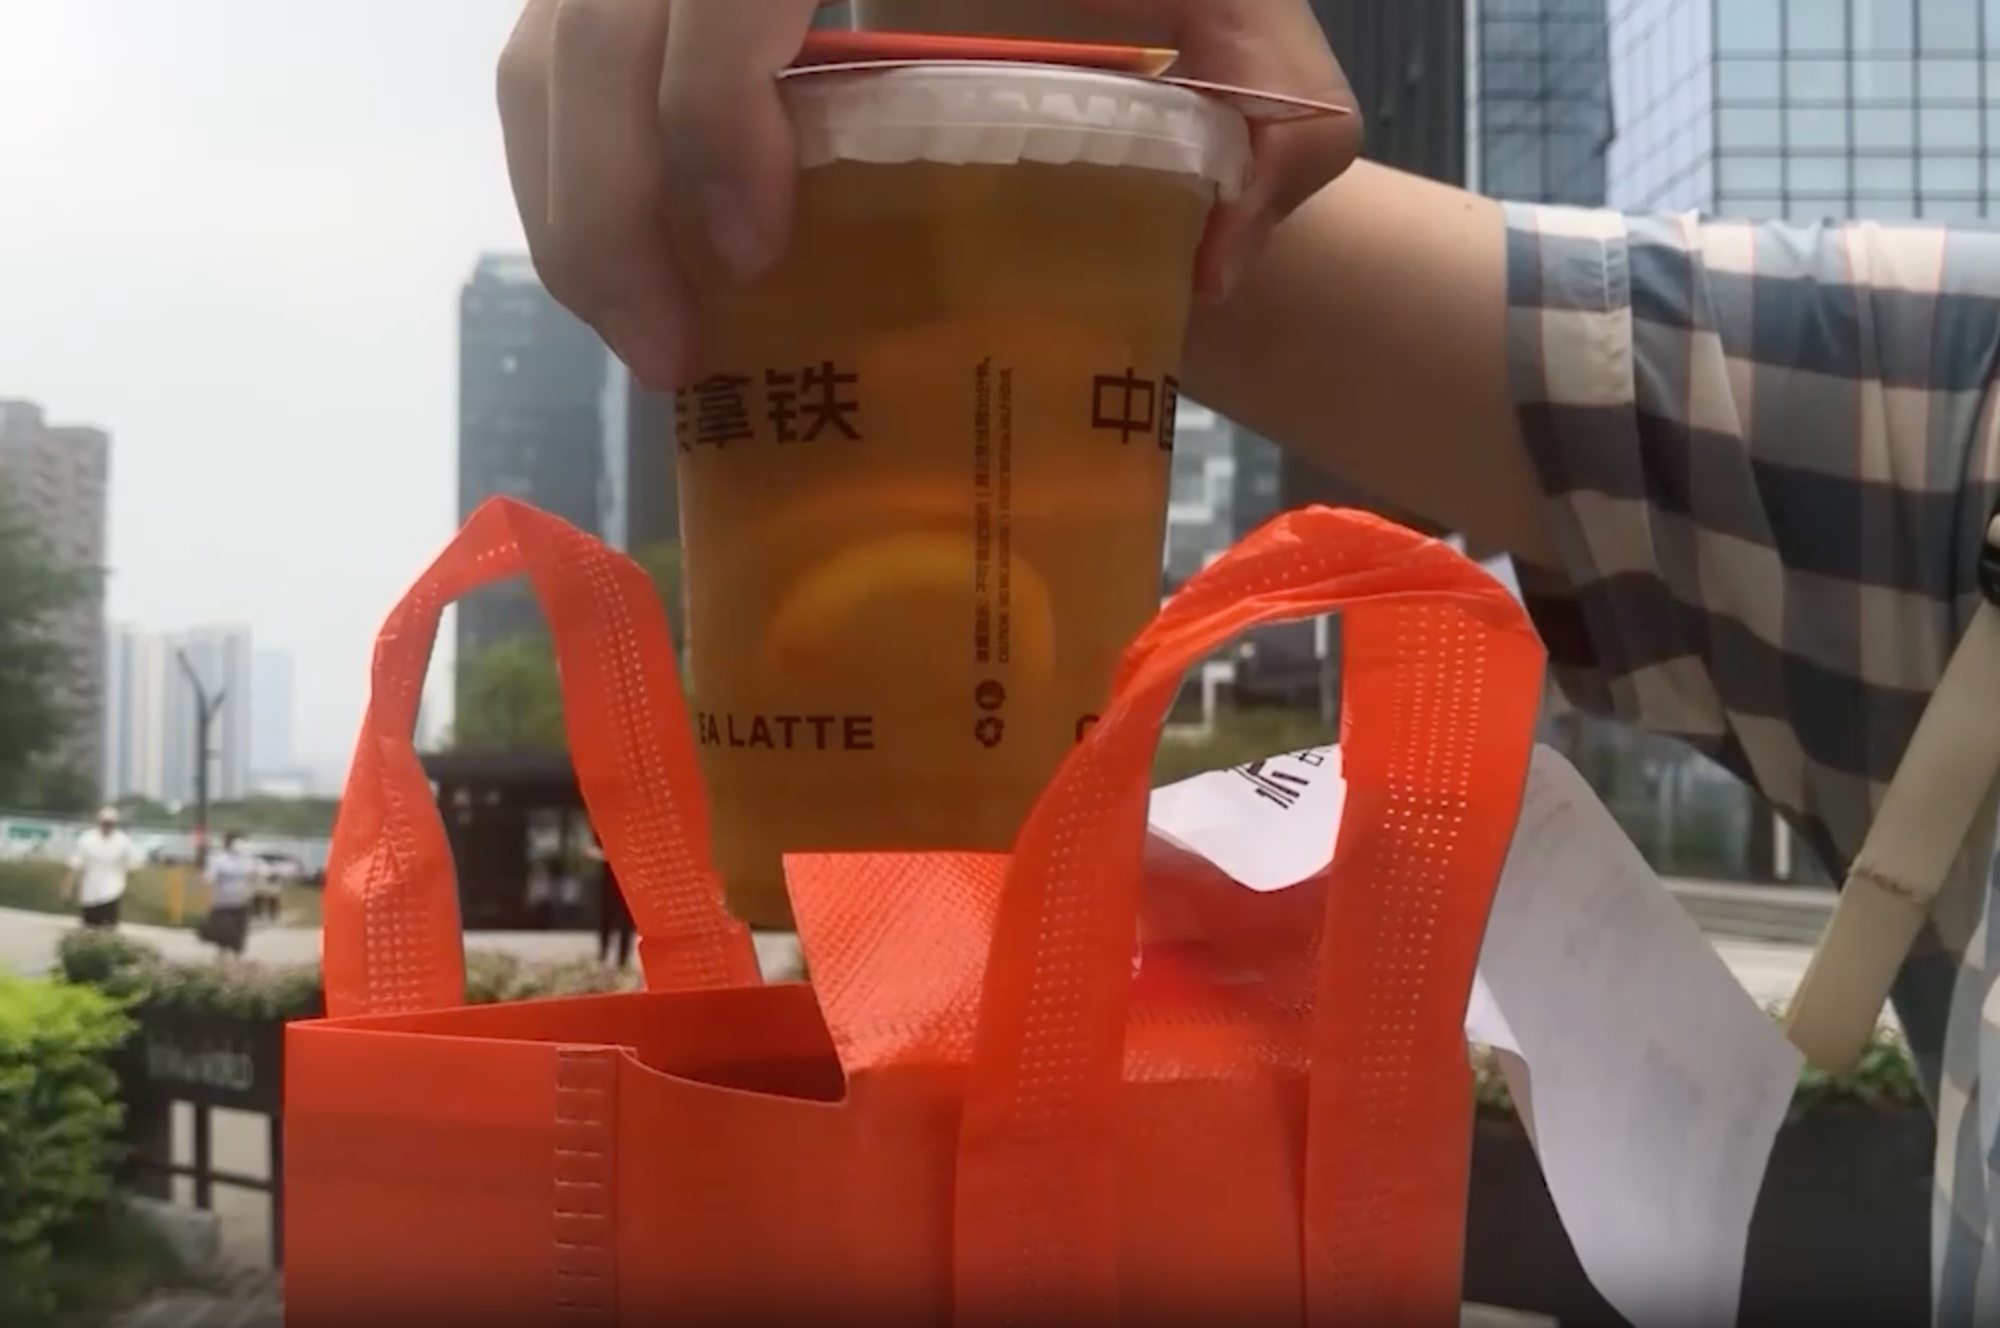 Tea delivered intact by a Meituan drone. Photo: Zeyi Yang